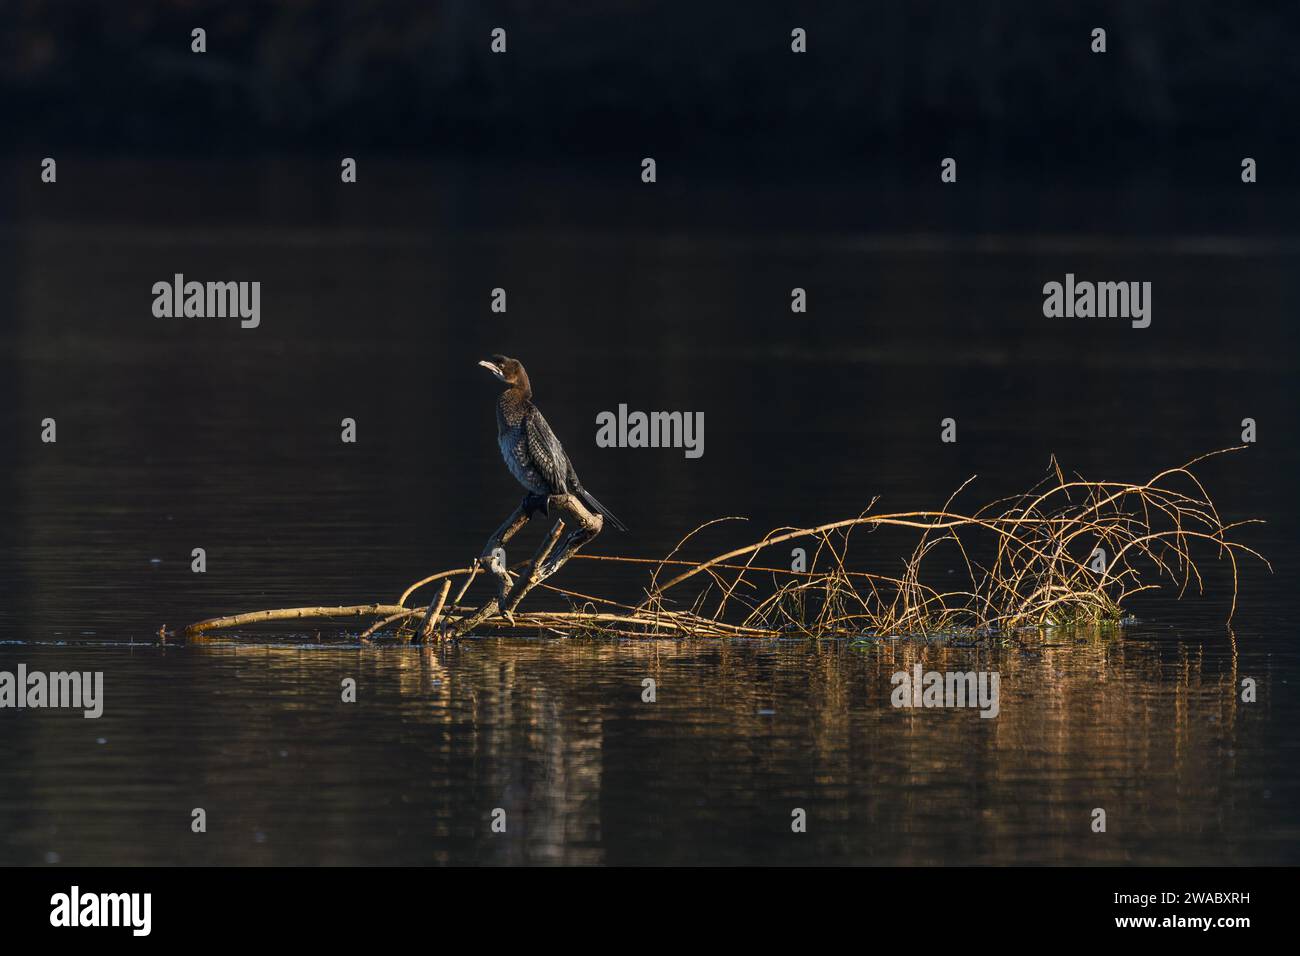 Pygmy cormorant (Microcarbo pygmaeus) perched on a branch in the water. Bas-Rhin, Alsace,Grand Est, France, Europe. Stock Photo